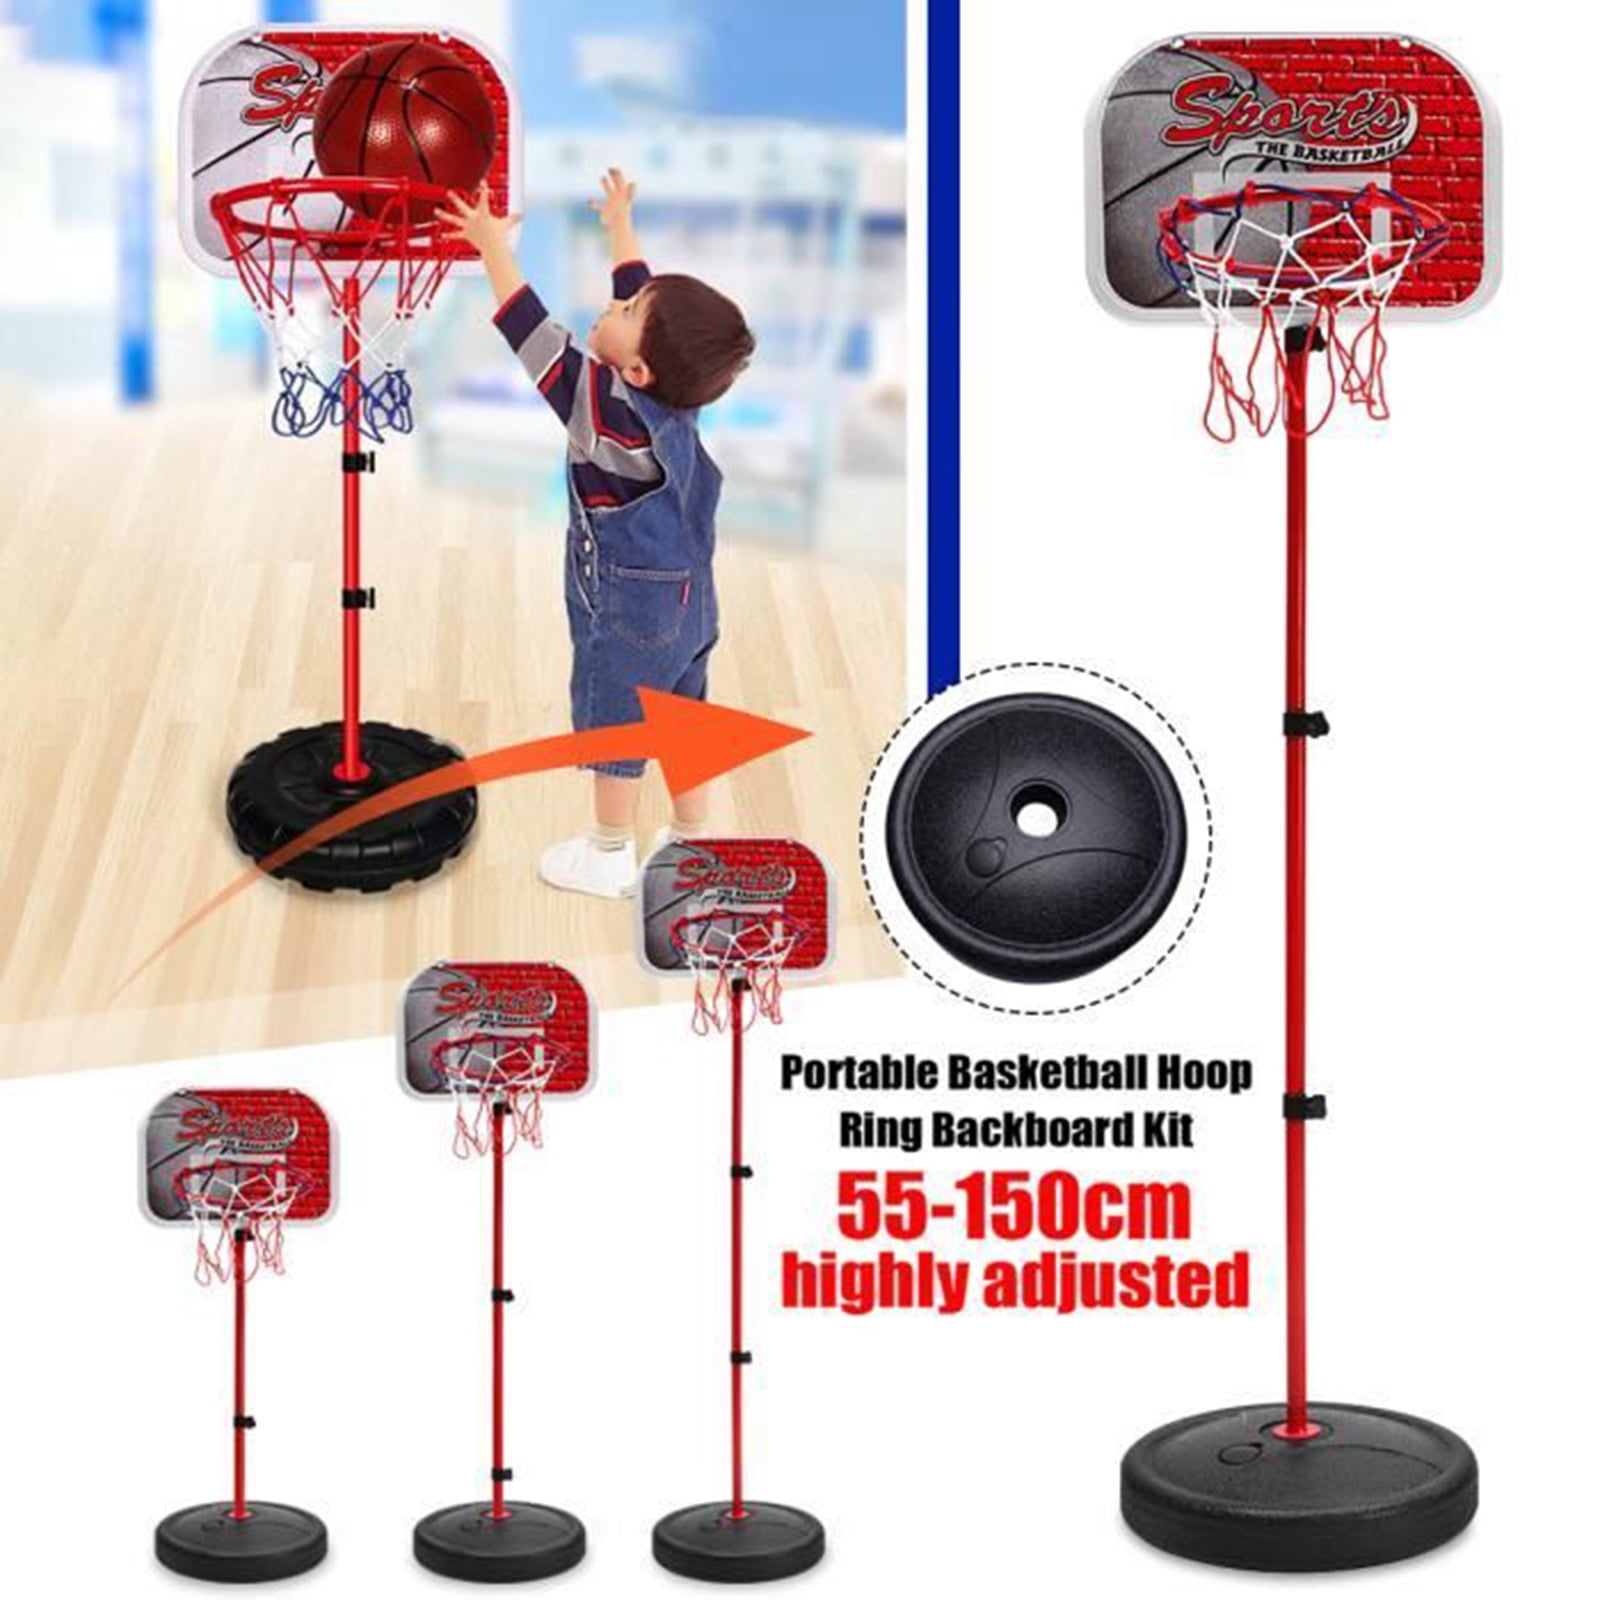 Free Stand Height Adjustable Backboard Hoop Kit with Pump Ball and Mounting Accessories Toy Set for Children Indoor Outdoor Basketball Stand 